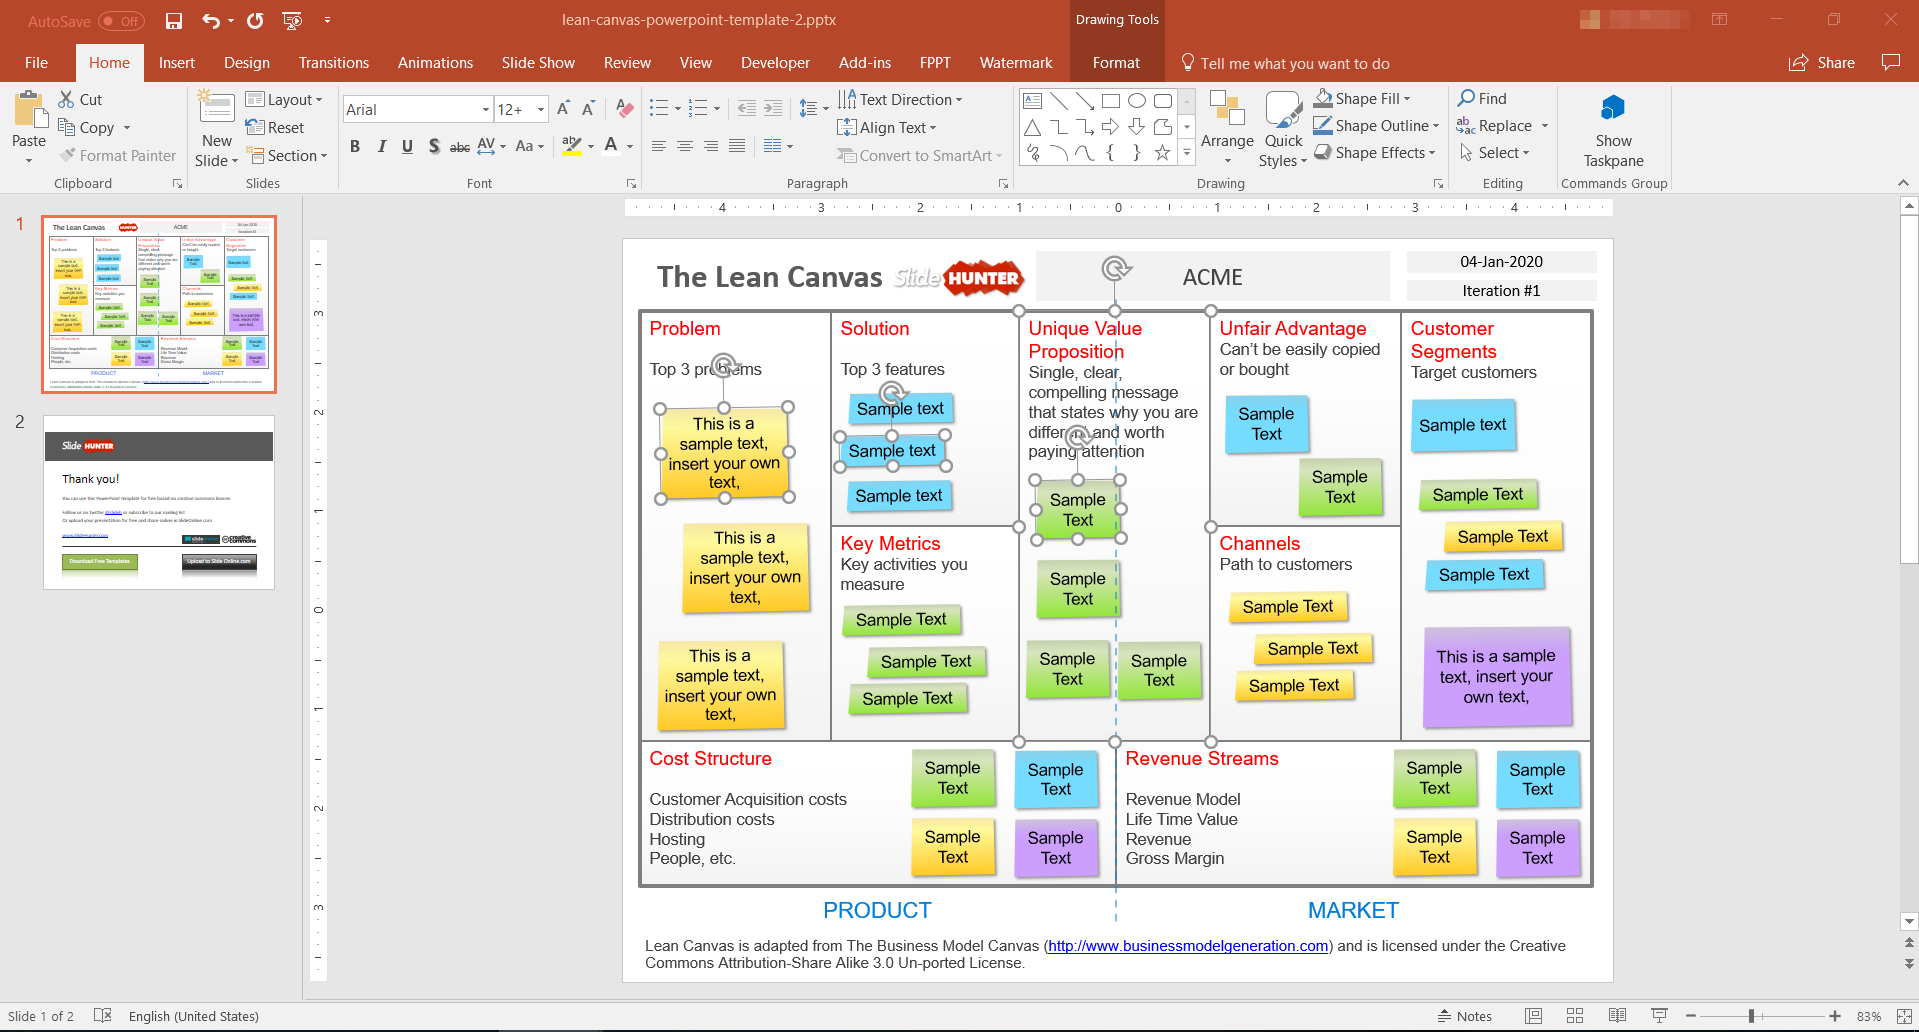 Free editable lean canvas template for PowerPoint - 4x3 format